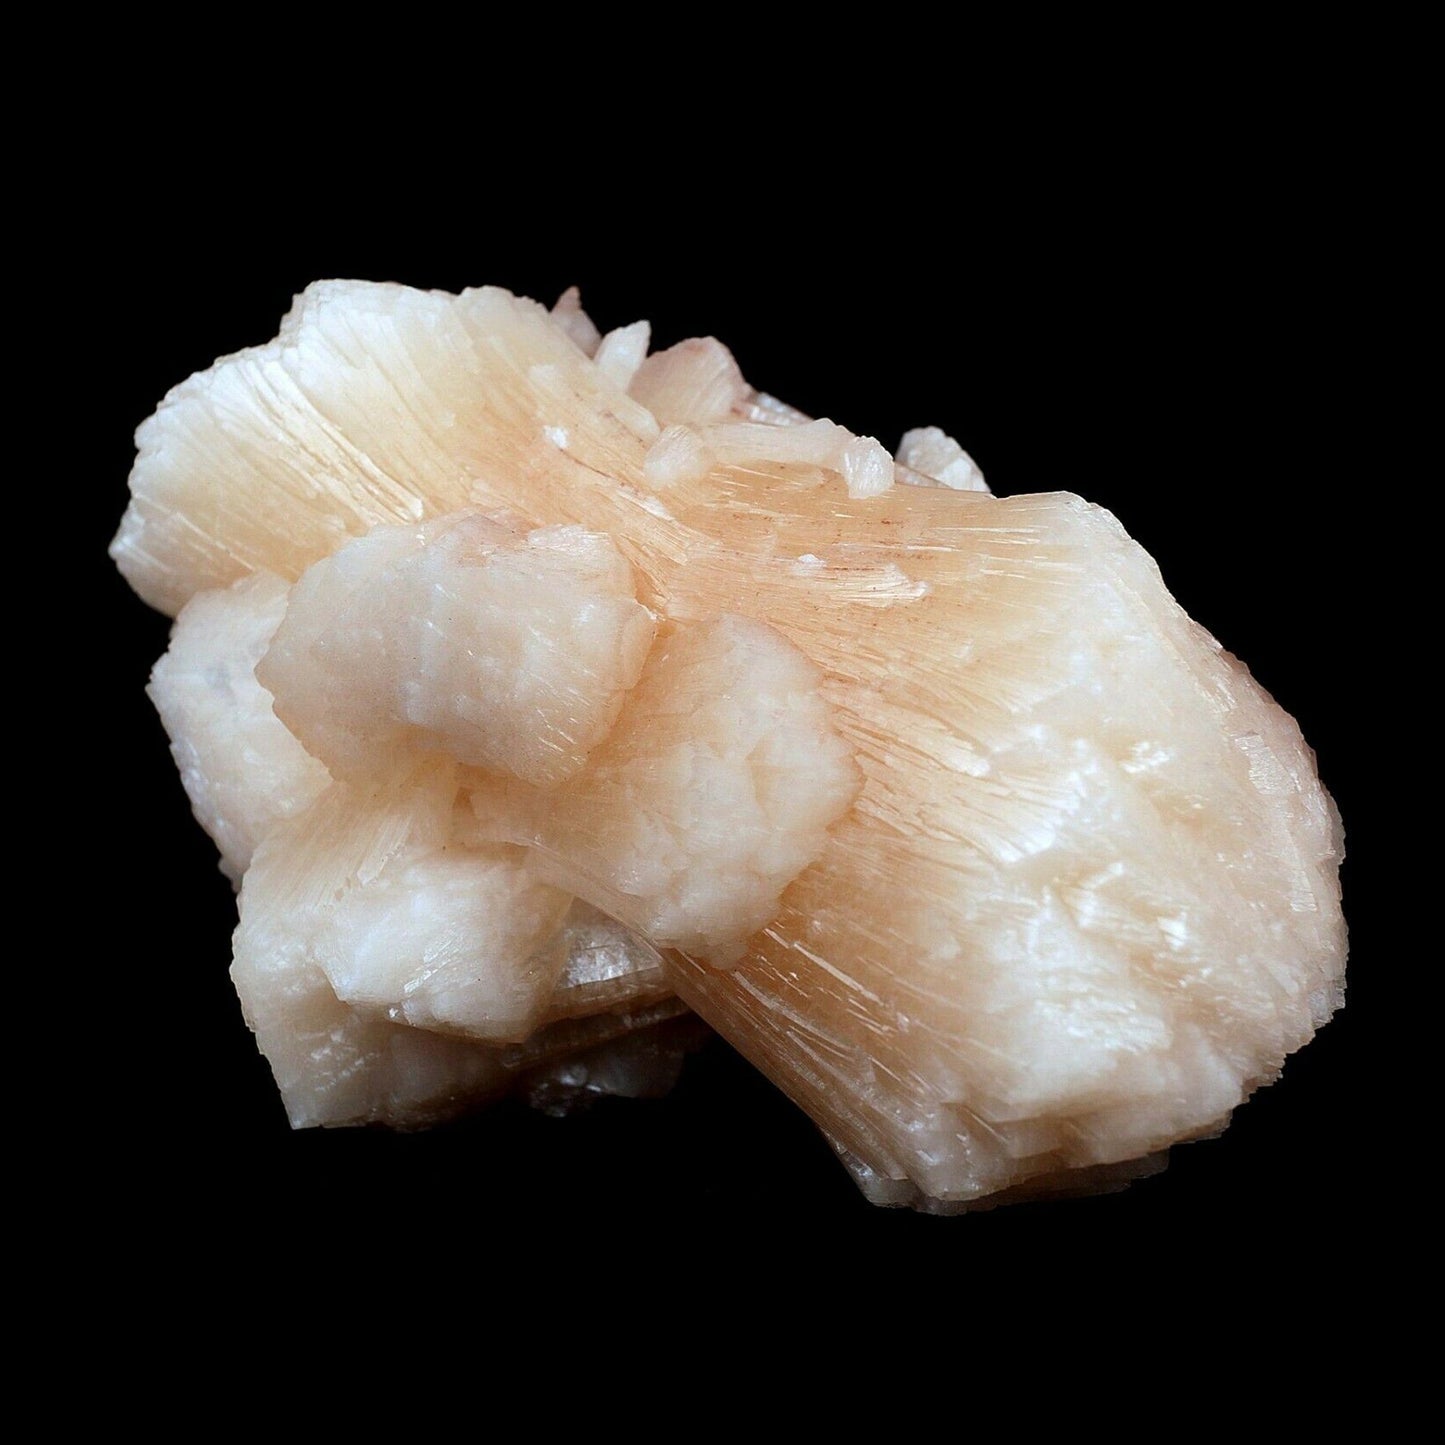 Stilbite Pink Crystal Natural Mineral Specimen # B 3642  https://www.superbminerals.us/products/stilbite-pink-crystal-natural-mineral-specimen-b-3642  Features:An exceptionally large cluster of Stilbite crystals in a classic bow tie formation along with numerous smaller Stilbite crystals on contrasting matrix. Primary Mineral(s): MM QuartzSecondary Mineral(s): StilbiteMatrix: N/A12 cm x 7 cm540 GmsLocality: Aurangabad, Maharashtra, IndiaYear of Discovery: 2020